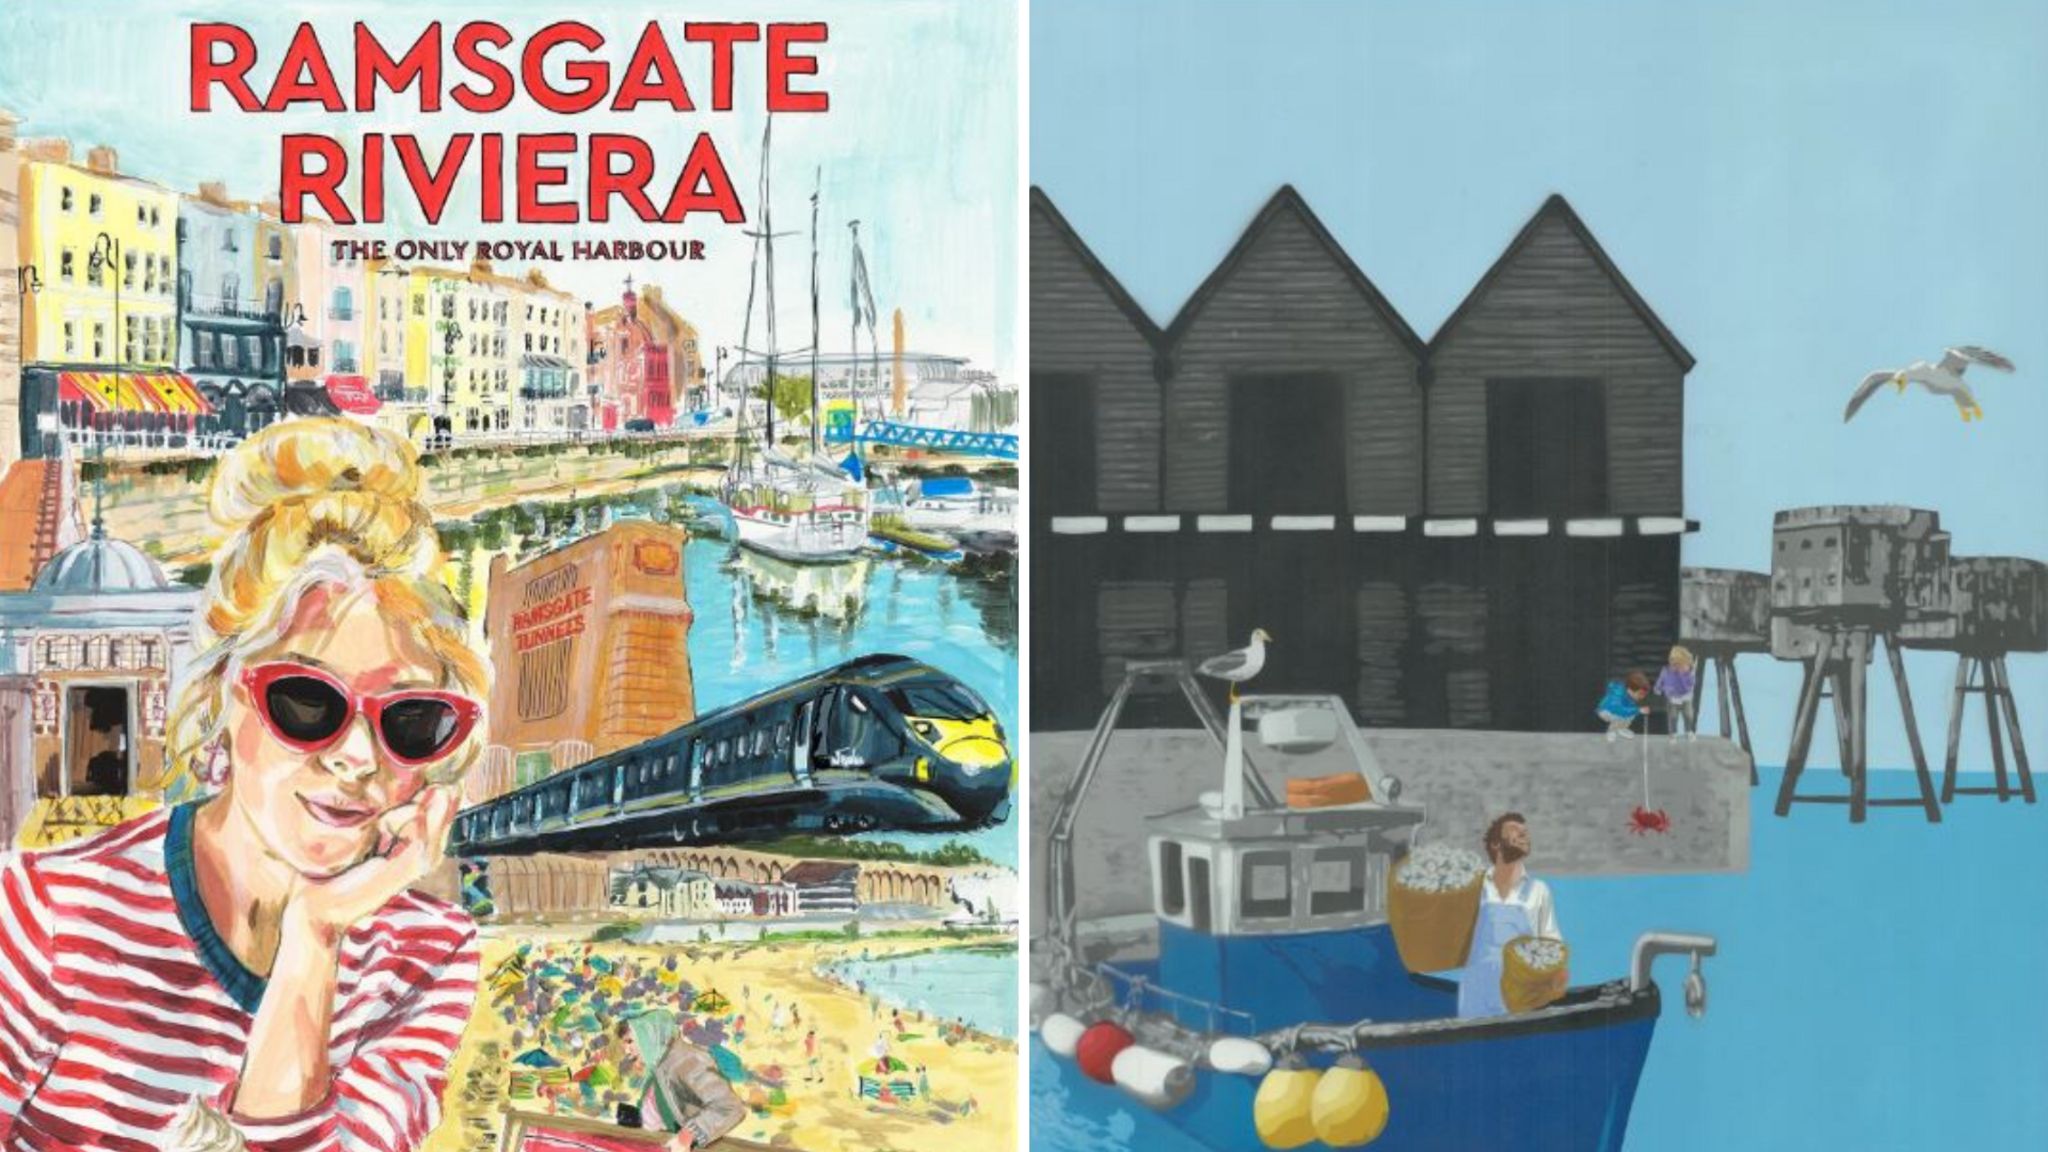 Lisa's poster for Ramsgate and Catman's design for Whitstable